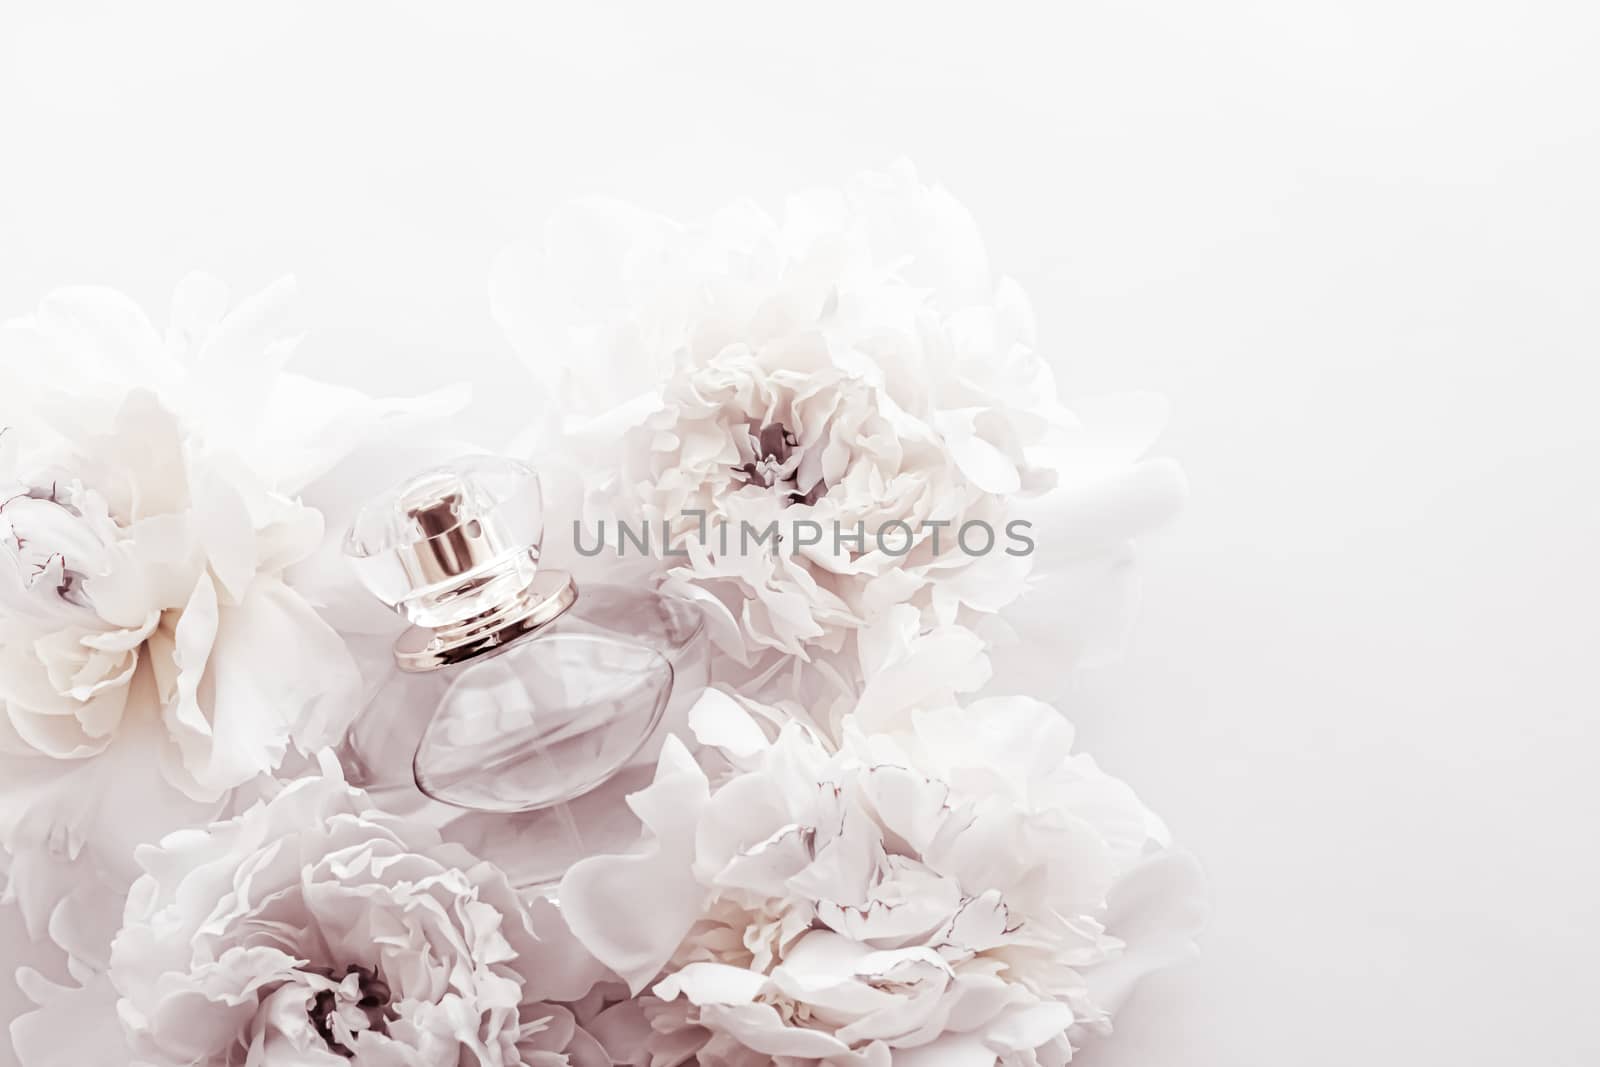 Chic fragrance bottle as luxe perfume product on background of peony flowers, parfum ad and beauty branding design